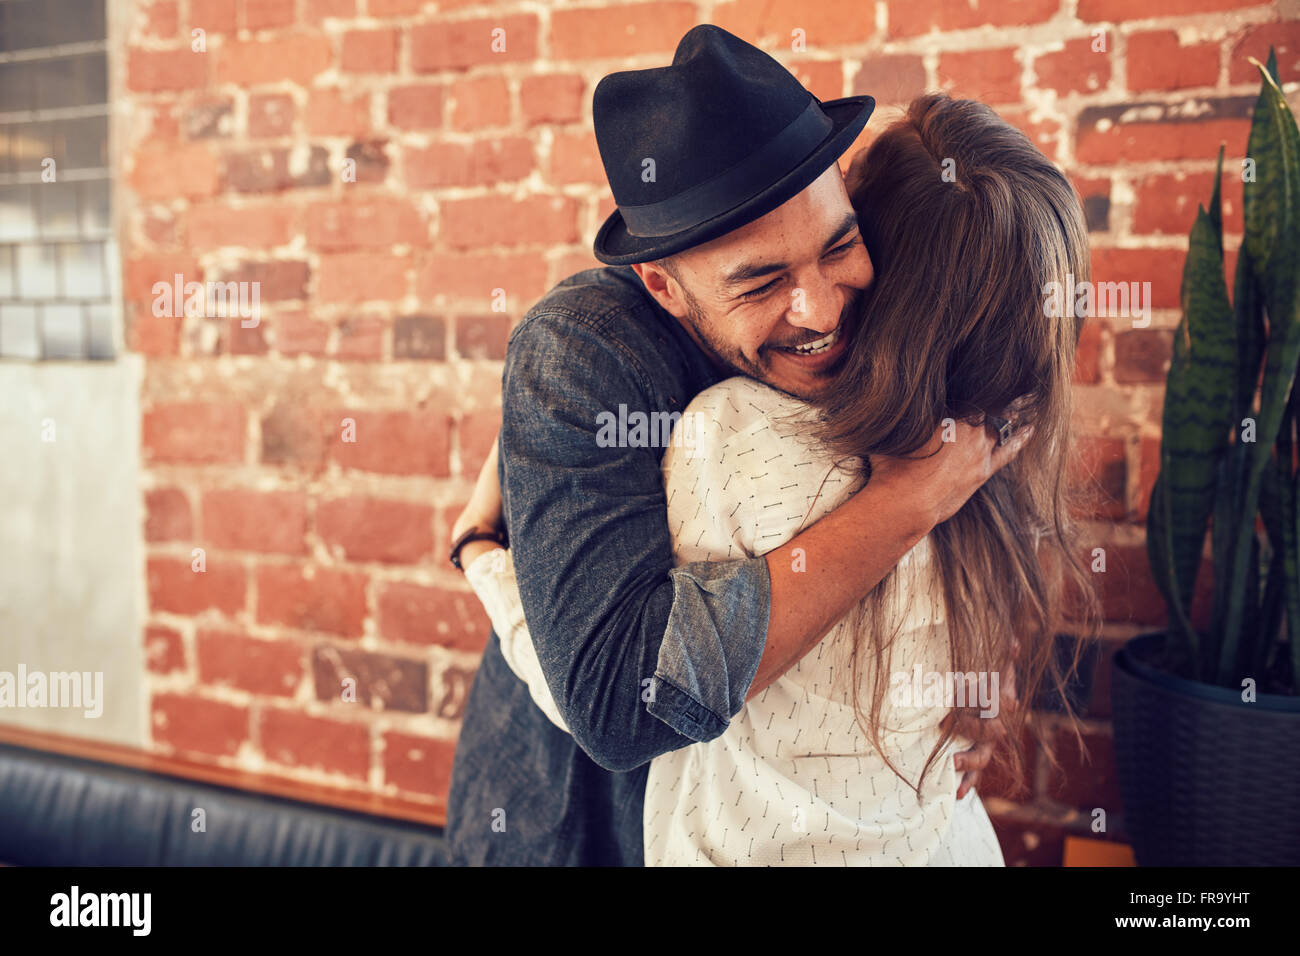 Portrait of young man embracing his girlfriend at cafe. Young man hugging a woman in a coffee shop. Stock Photo